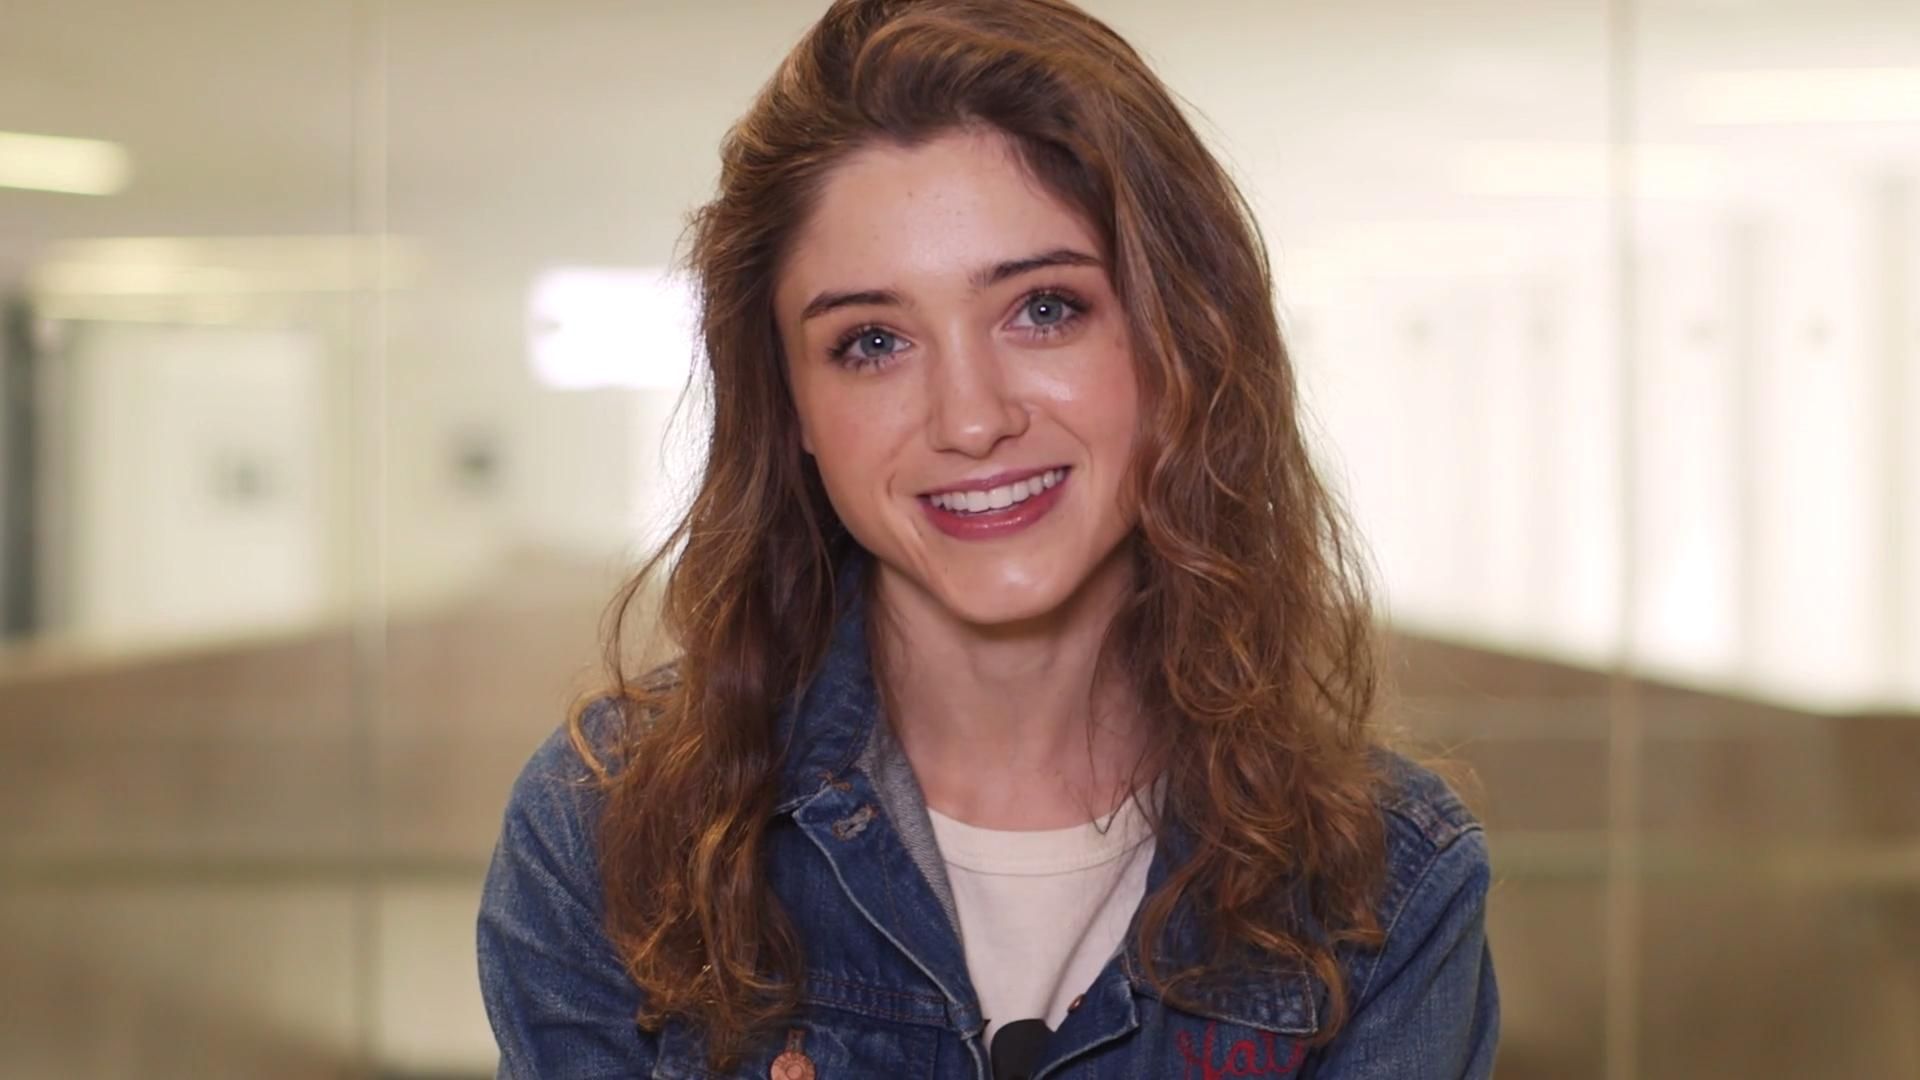 7 Things to Know About Stranger Things Star Natalia Dyer